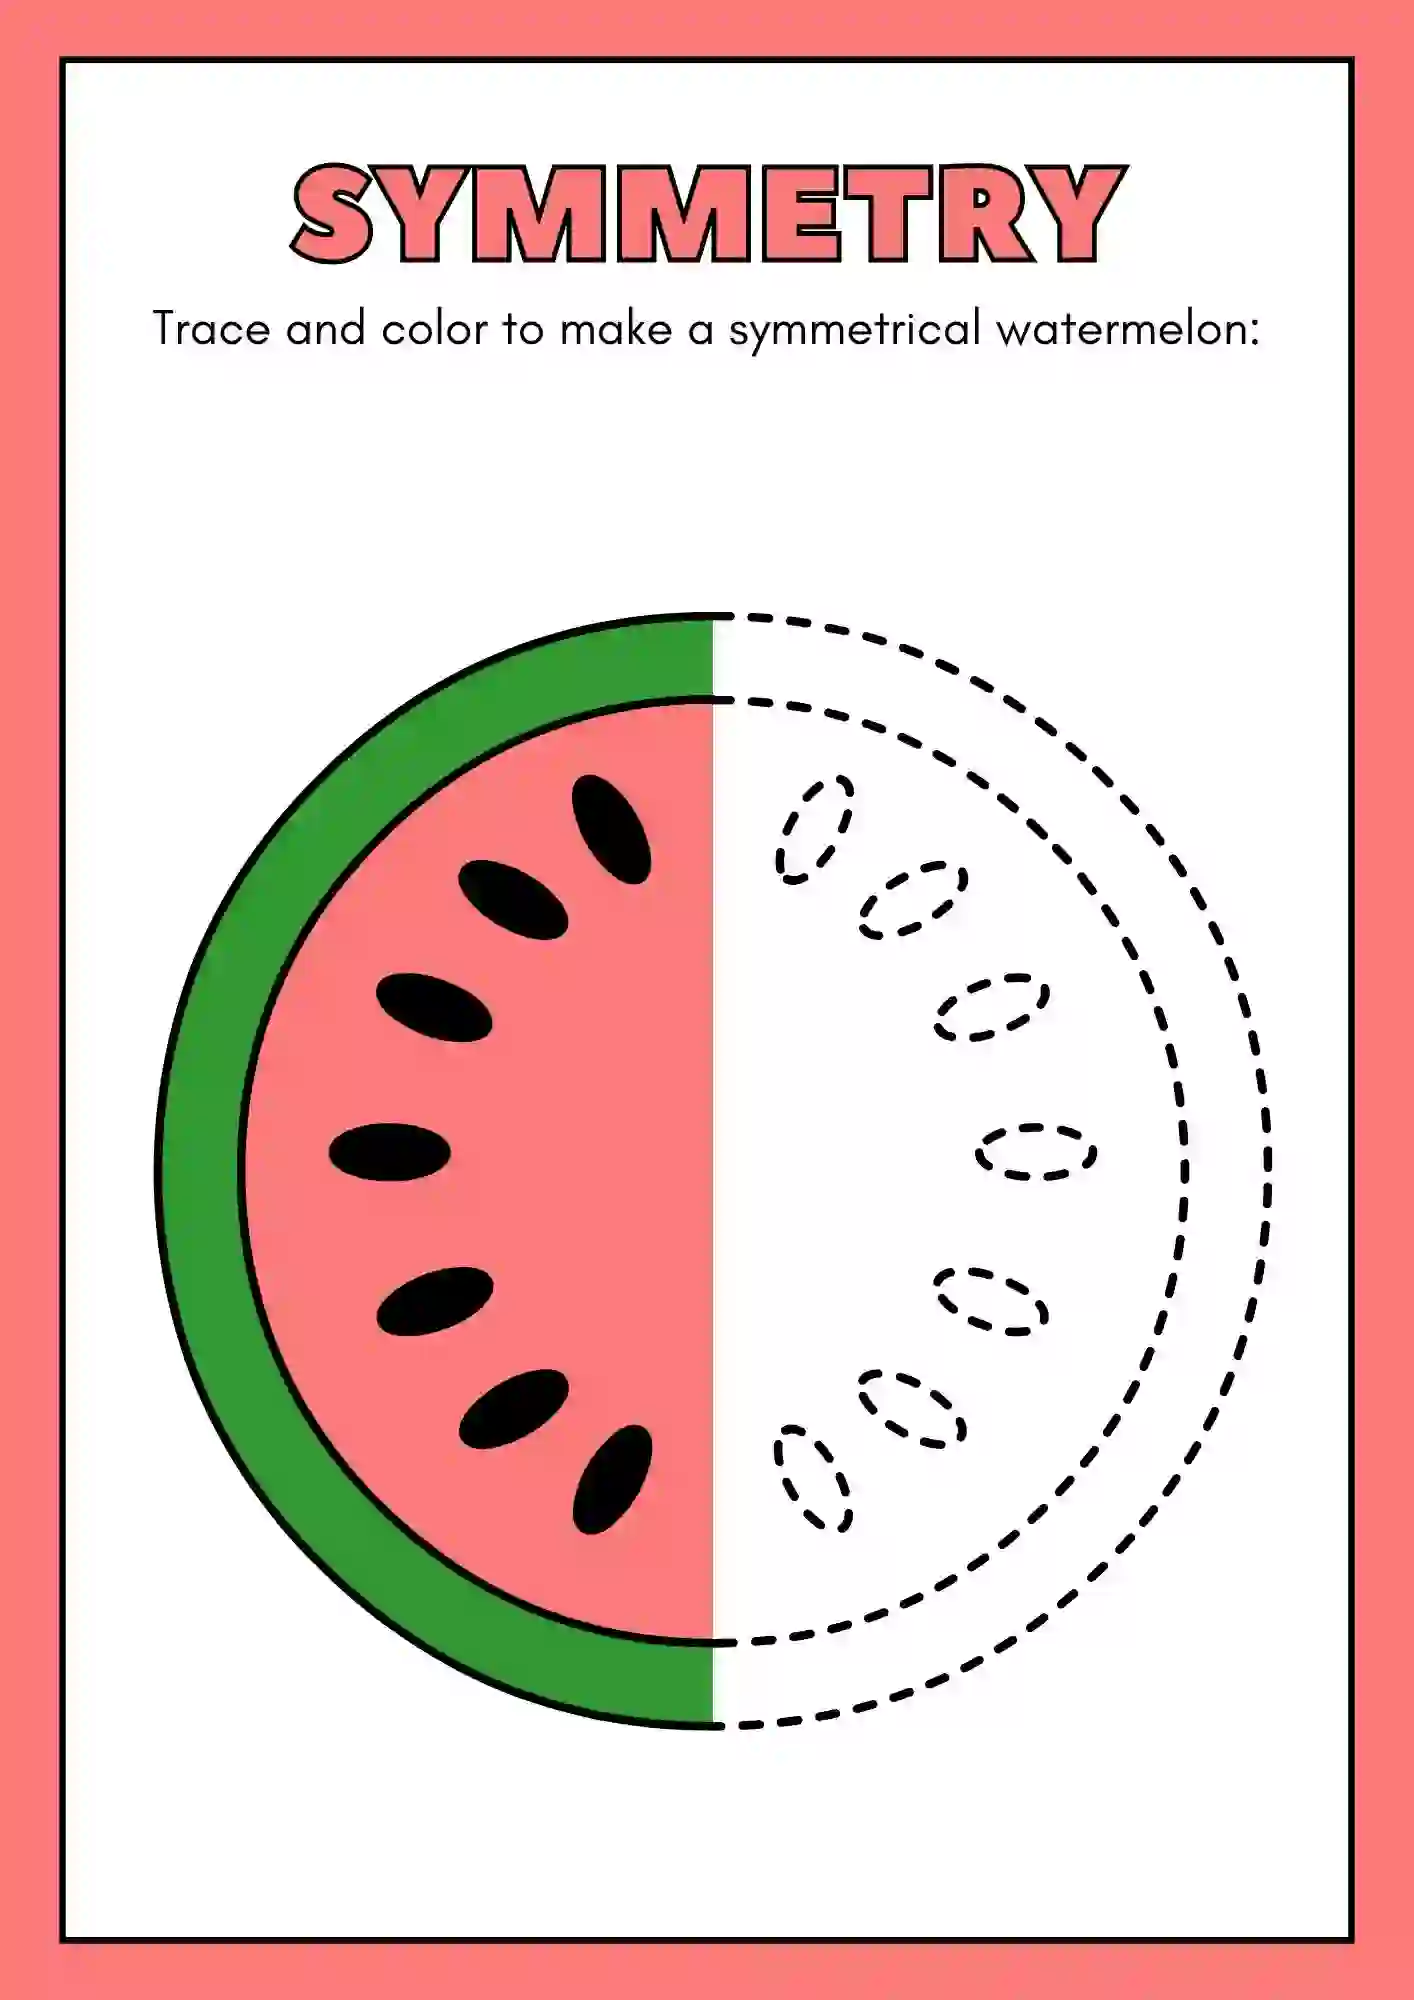 Symmetric Drawing and Coloring worksheets (watermelon)